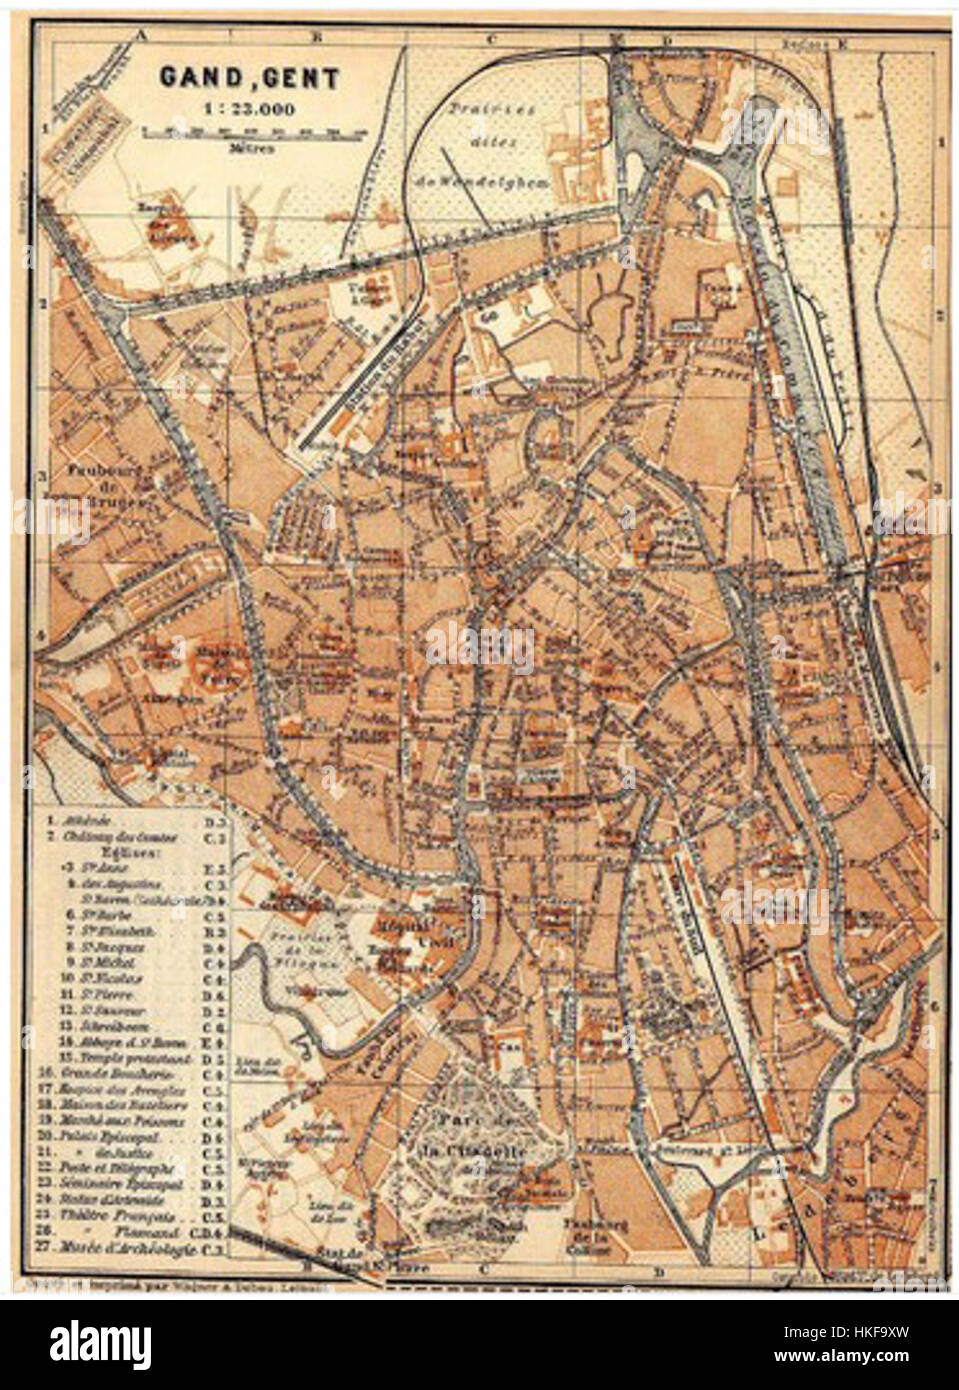 Map of Ghent by Wagner and debes, 1901 Stock Photo